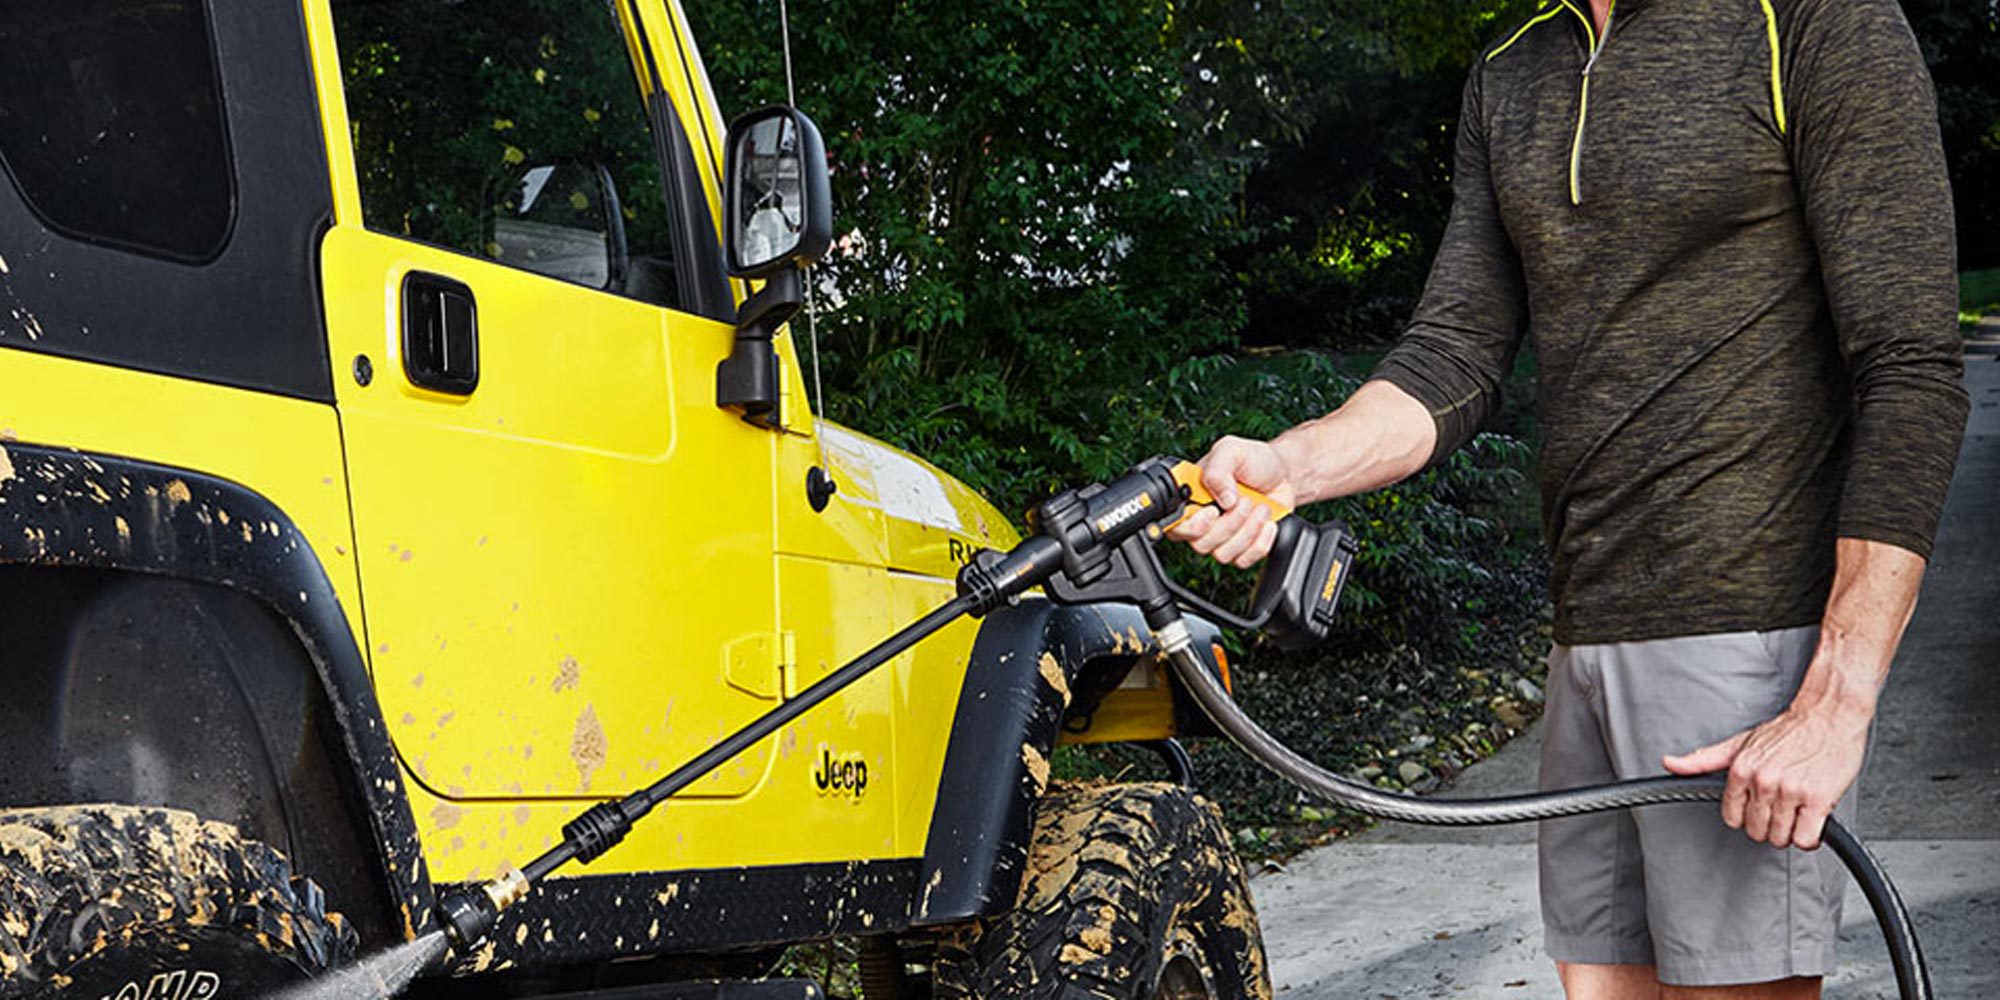 photo of WORX Hydroshot is a simple electric pressure washer, now $40 (Refurb, Orig. $119) image